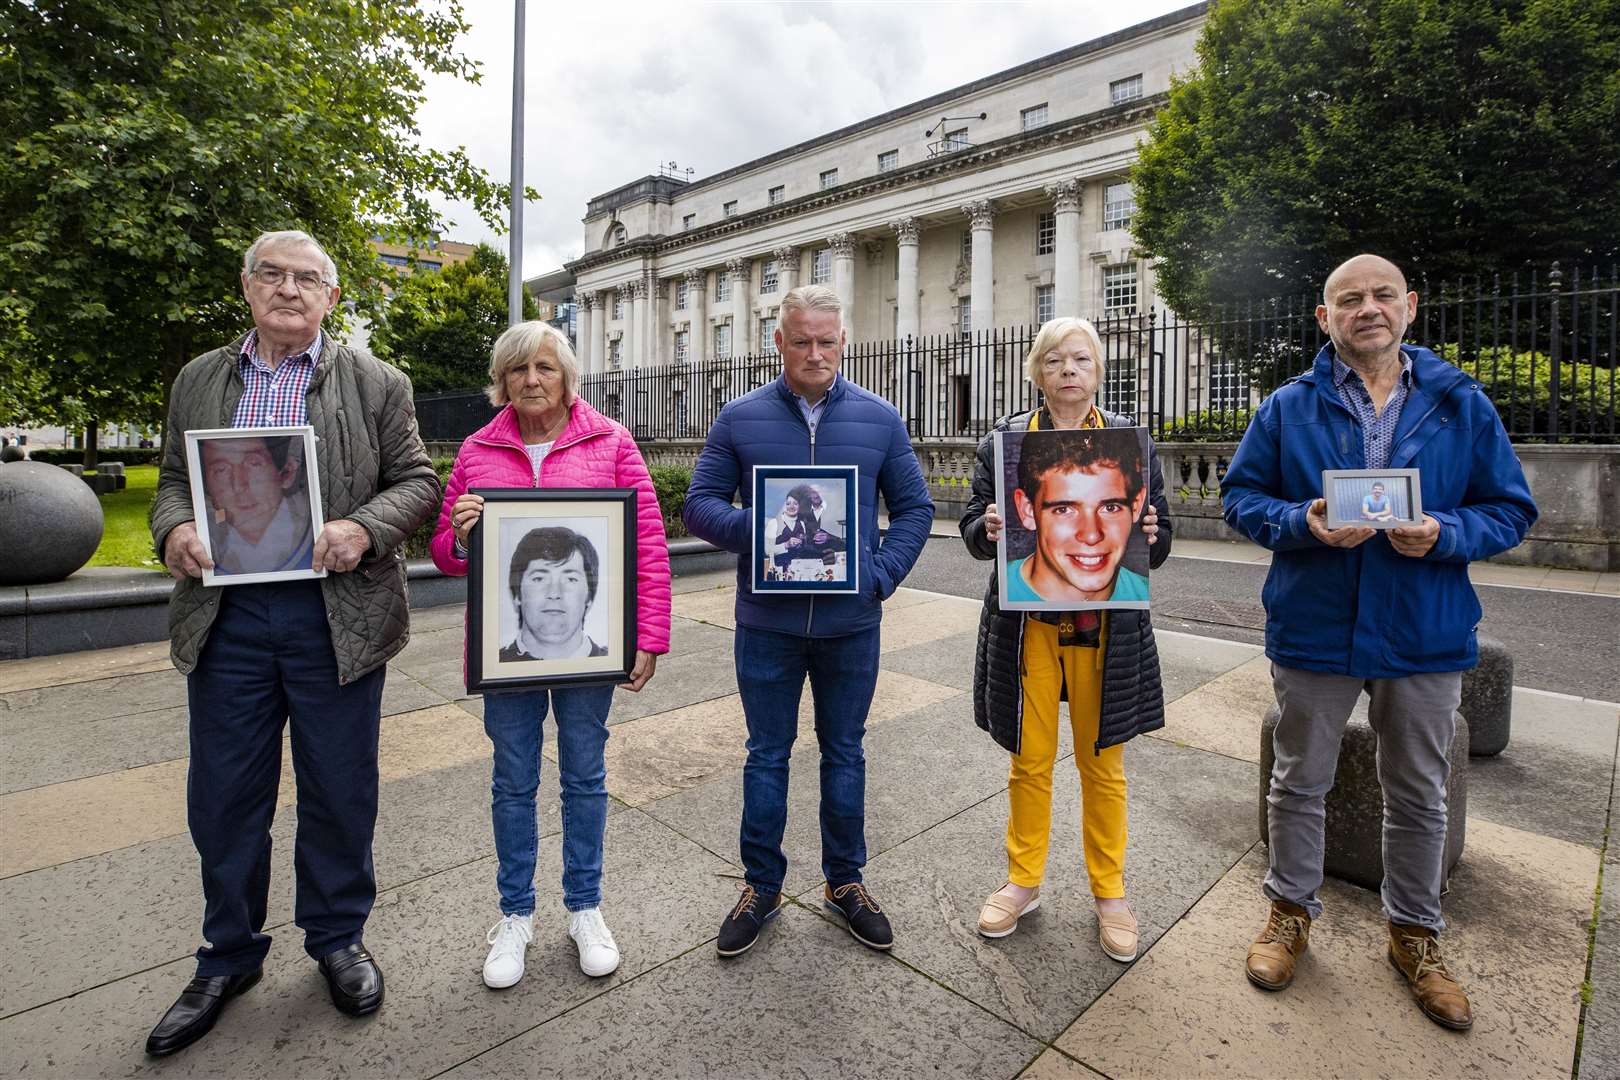 (from left) Michael Armstrong holding an image of his brother Thomas Armstrong, Pauline McNally holding an image of her husband Phelim McNally, Conor Casey holding an image of his parents Kathleen and Tommy Casey, Briege O’Donnell holding an image of her son Dwayne O’Donnell, and Peter Anderson holding an image of his brother Sean Anderson, outside Belfast High Court (Liam McBurney/PA)